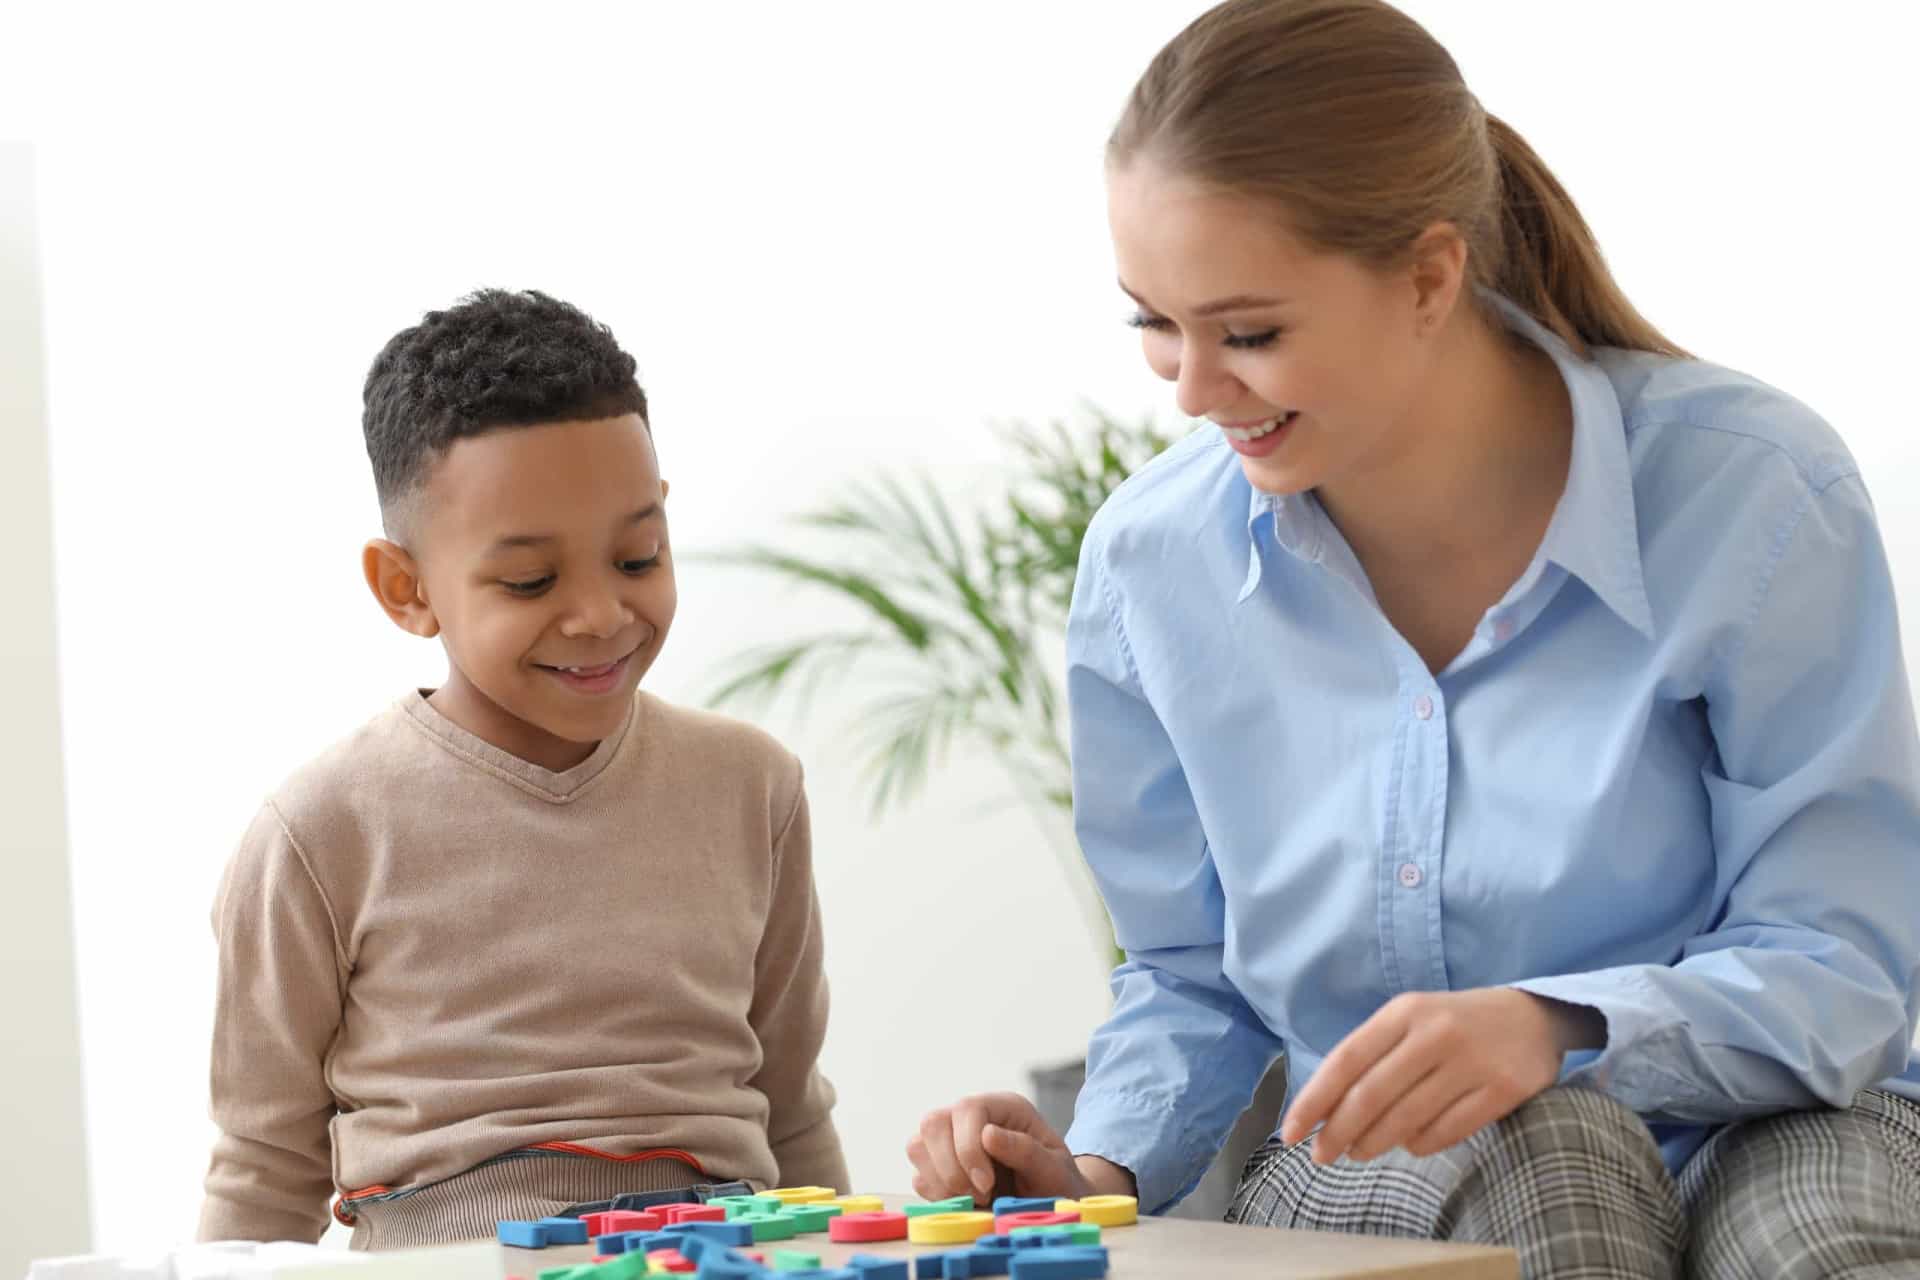 <p><span>Your child may not be able to speak during the consultation, but a professional will be prepared for this and will have other ways to help your child communicate. </span></p><p><a href="https://www.msn.com/en-us/community/channel/vid-7xx8mnucu55yw63we9va2gwr7uihbxwc68fxqp25x6tg4ftibpra?cvid=94631541bc0f4f89bfd59158d696ad7e">Follow us and access great exclusive content everyday</a></p>